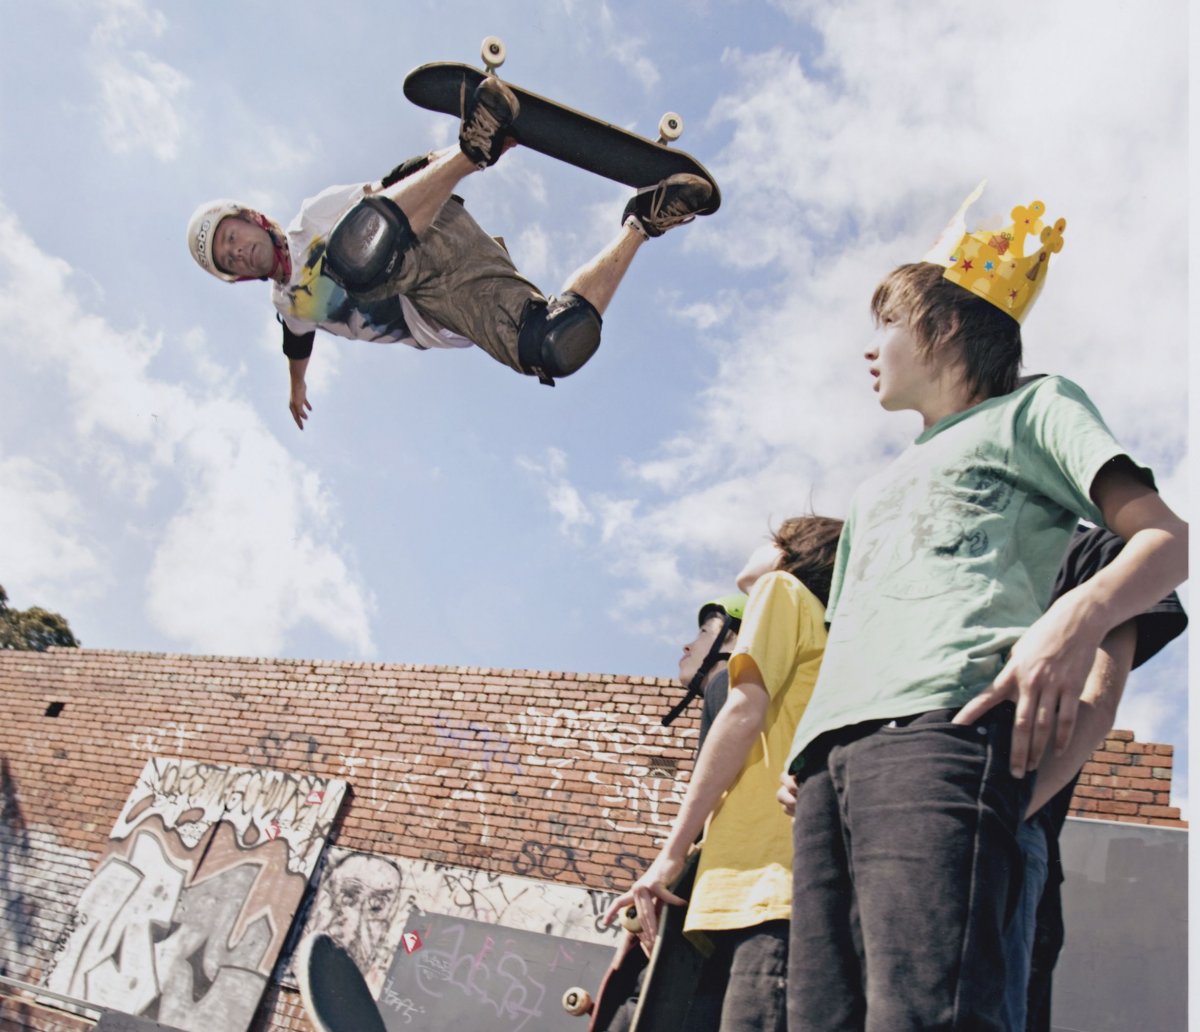 A man in the air doing a trick on a skateboard on the left with some young men watching him on the right